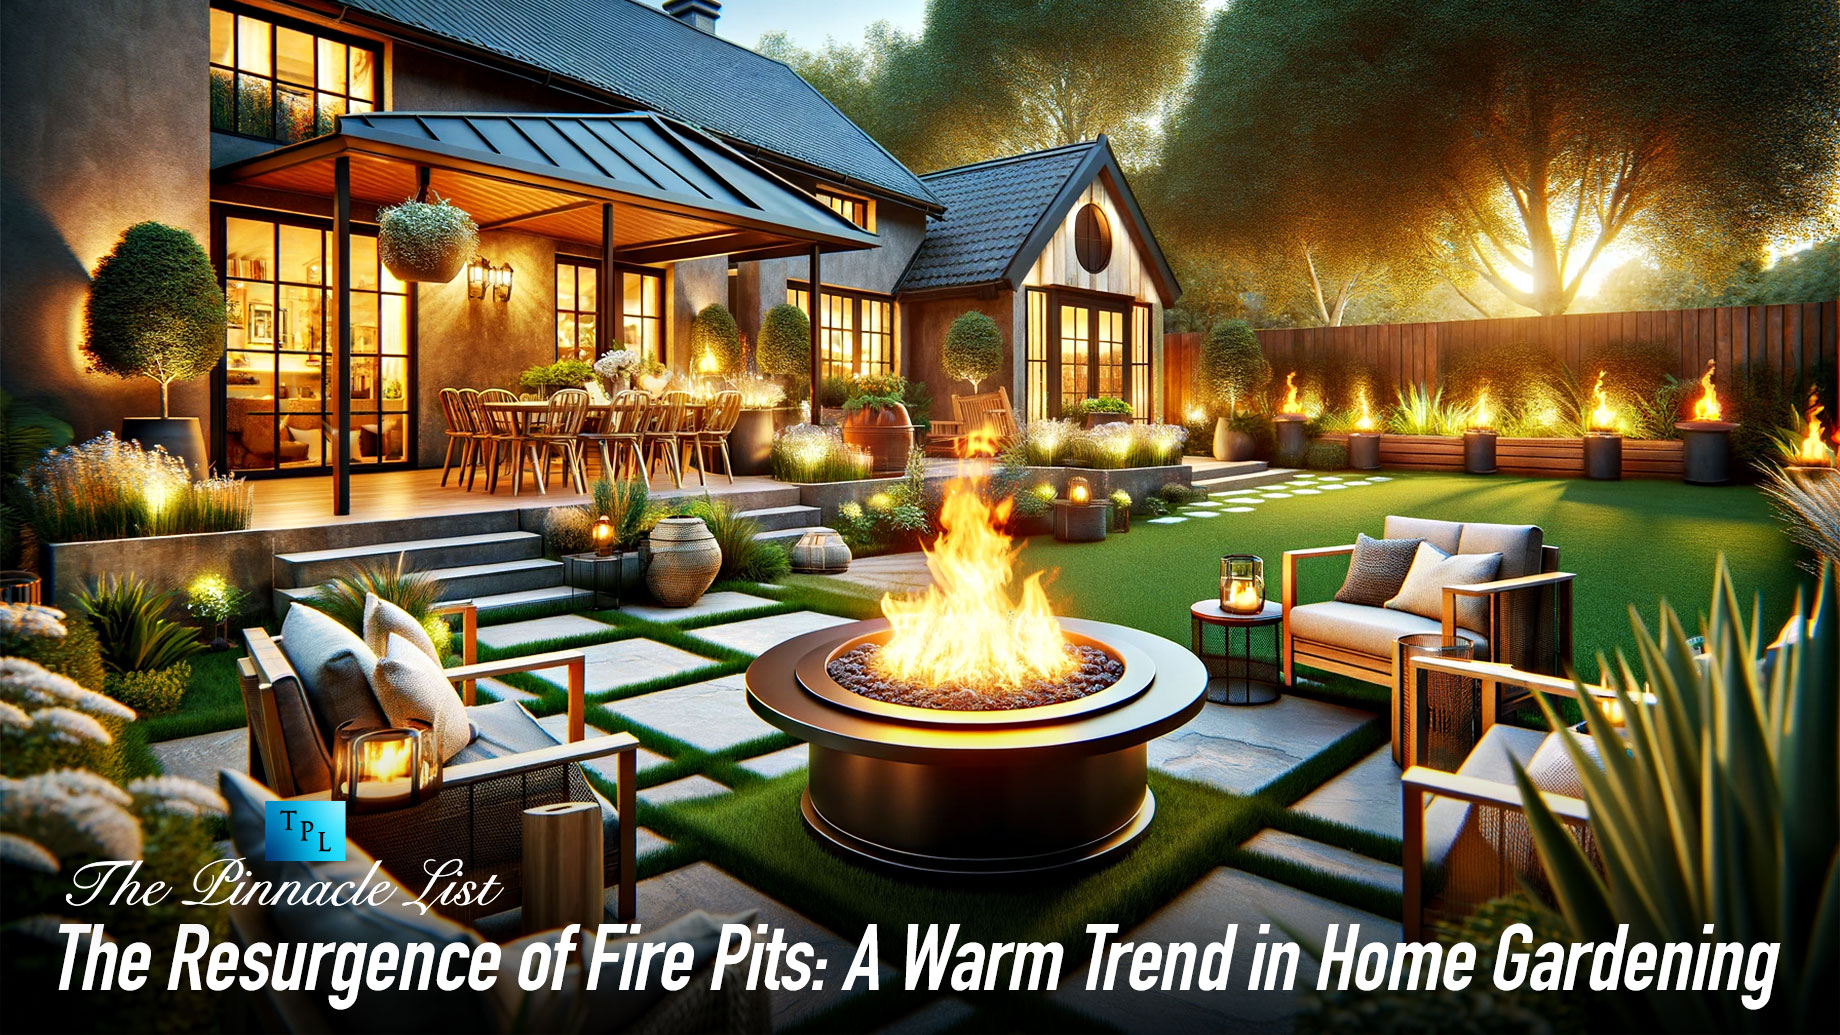 The Resurgence of Fire Pits: A Warm Trend in Home Gardening